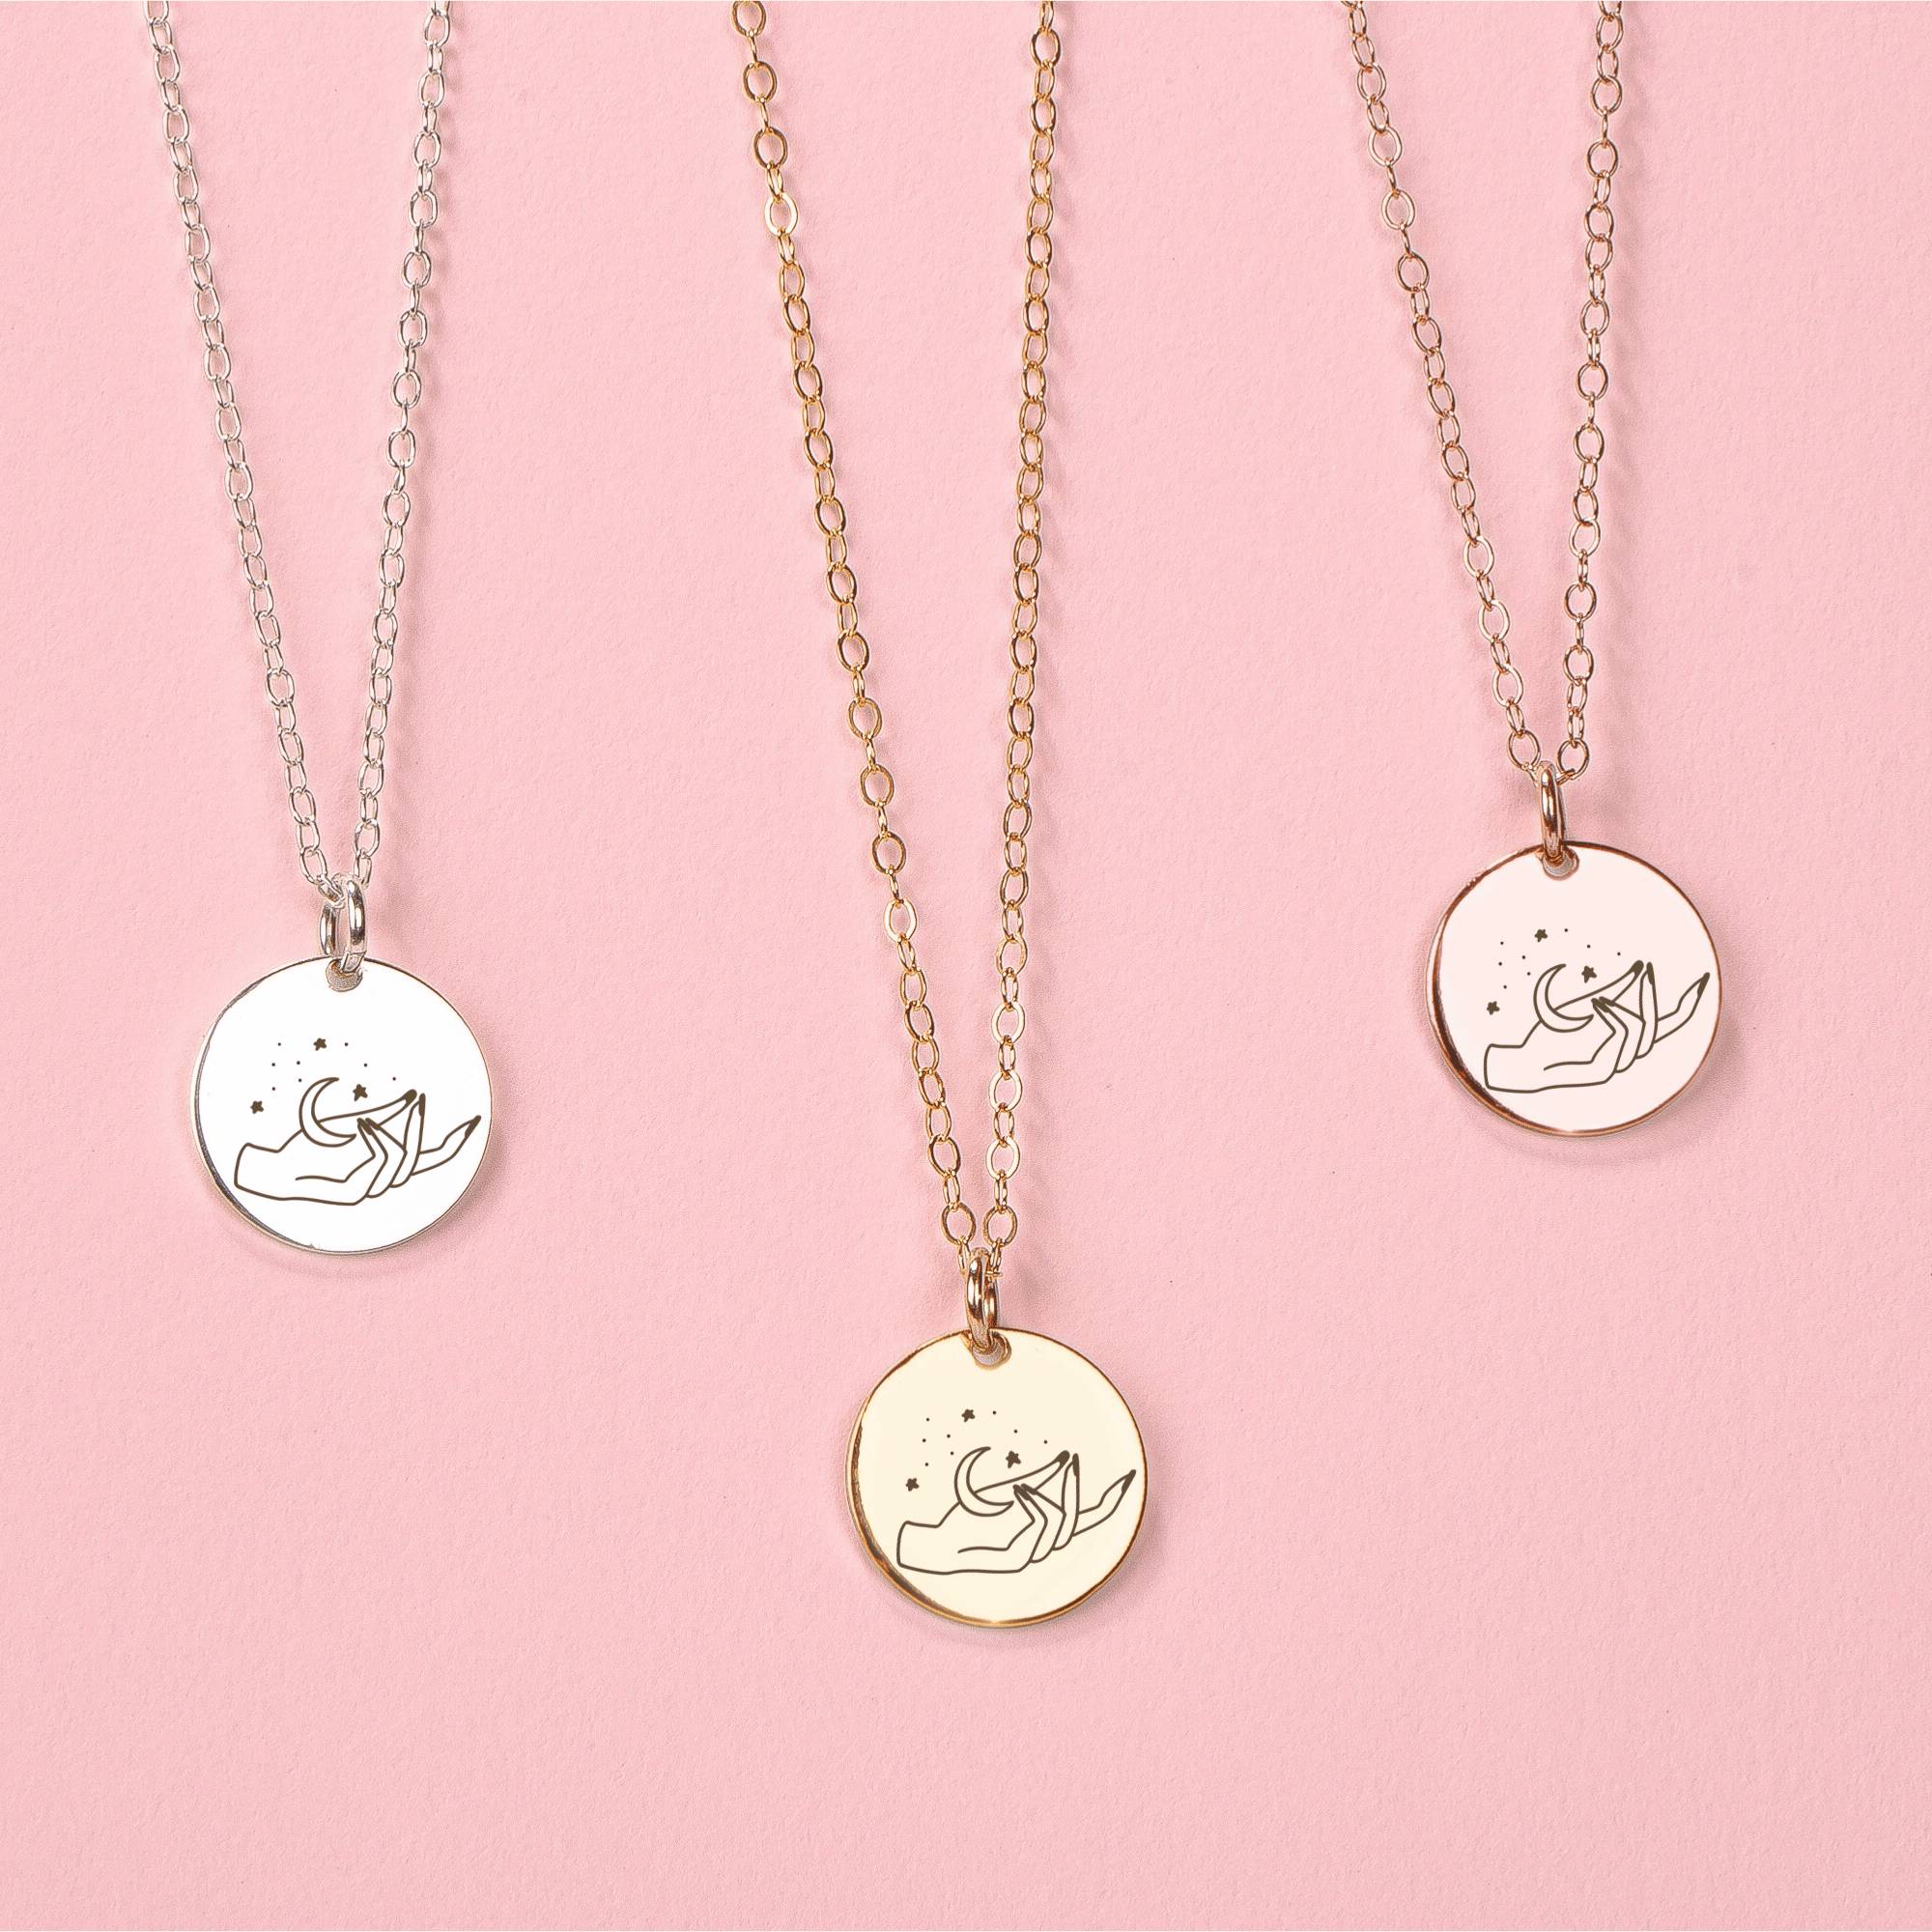 She Holds The Moon Disc Necklace - Melanie Golden Jewelry - disc necklaces, Engraved Jewelry, minimal minimal necklace, minimal necklace, mystic, necklace, necklaces